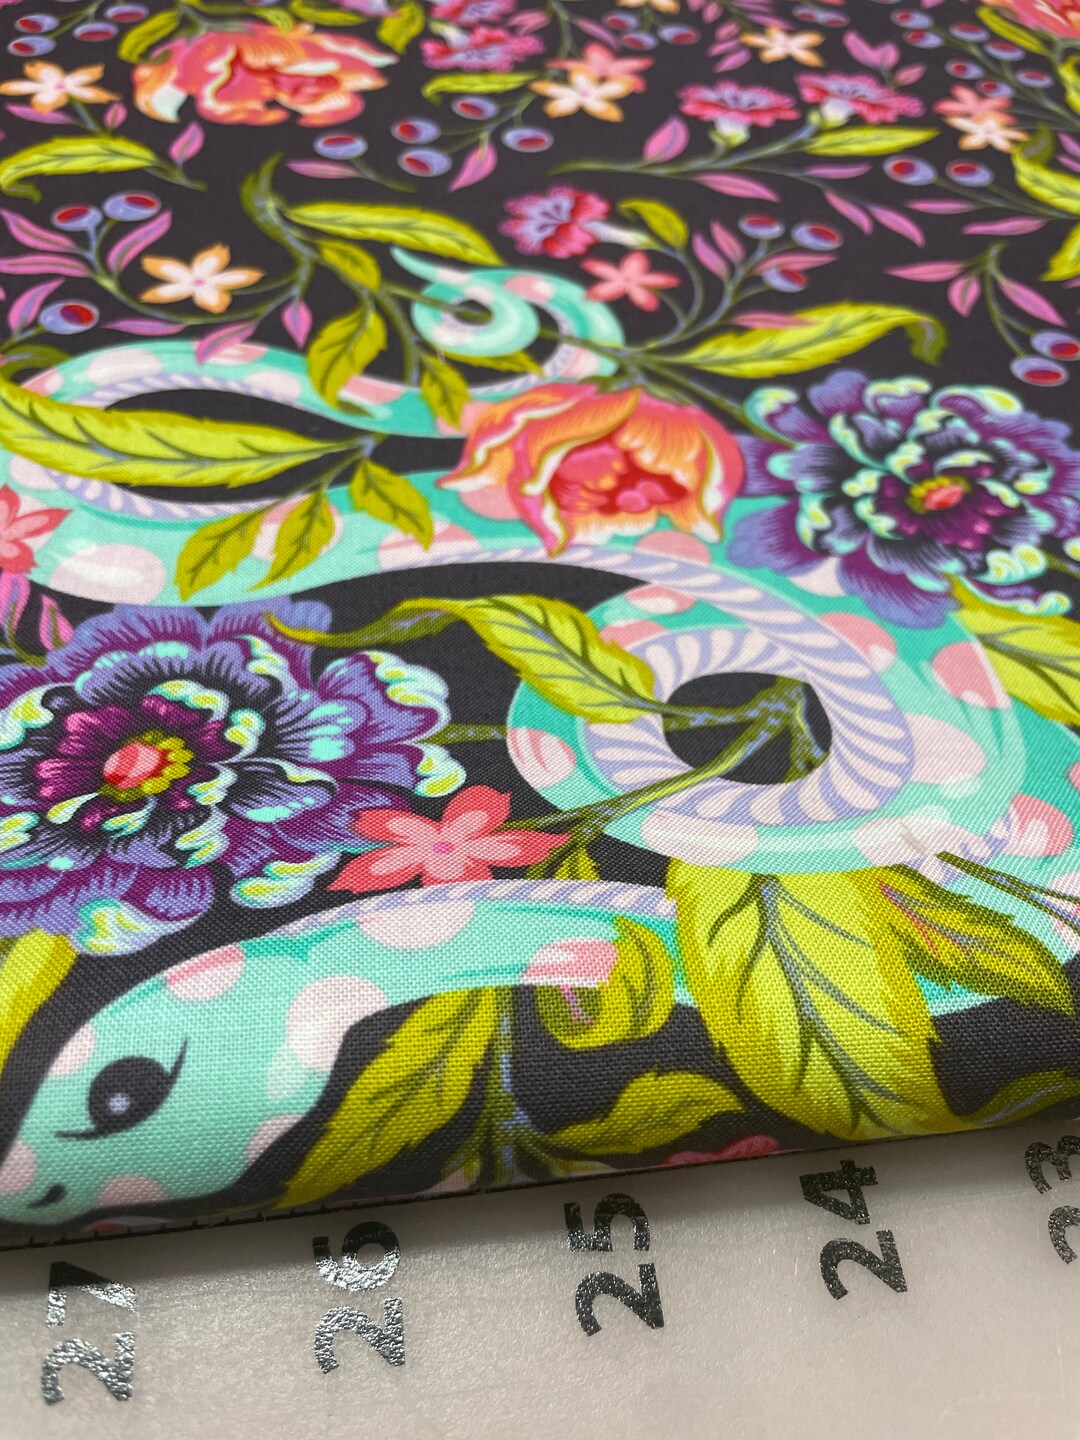 Tula Pink Moonglow Hissy Fit in Dusk Cotton Fabric by - Etsy